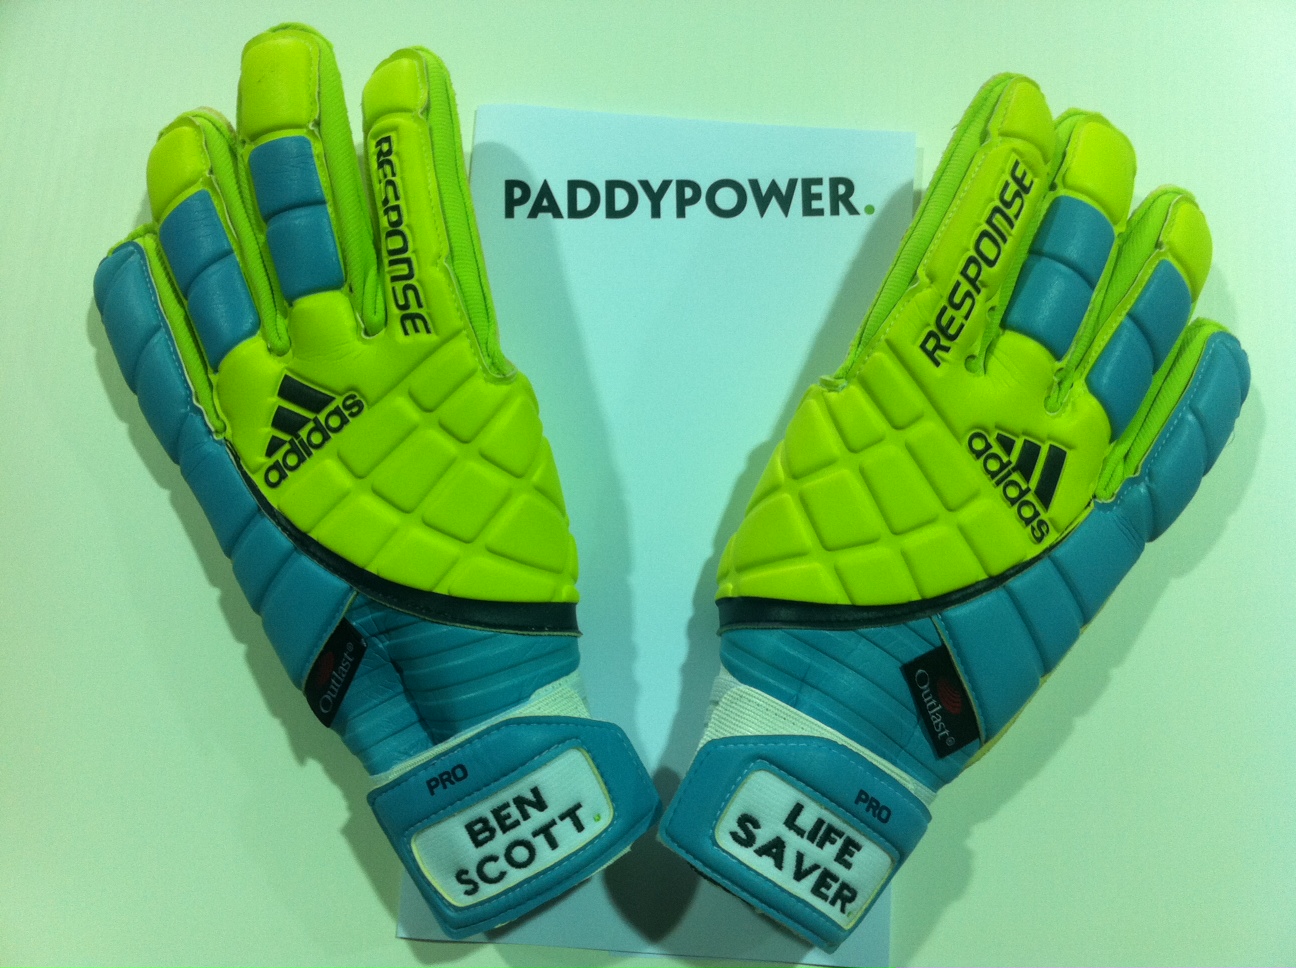 Goalkeeper gloves – Ben Scott » Who Ate all the Pies